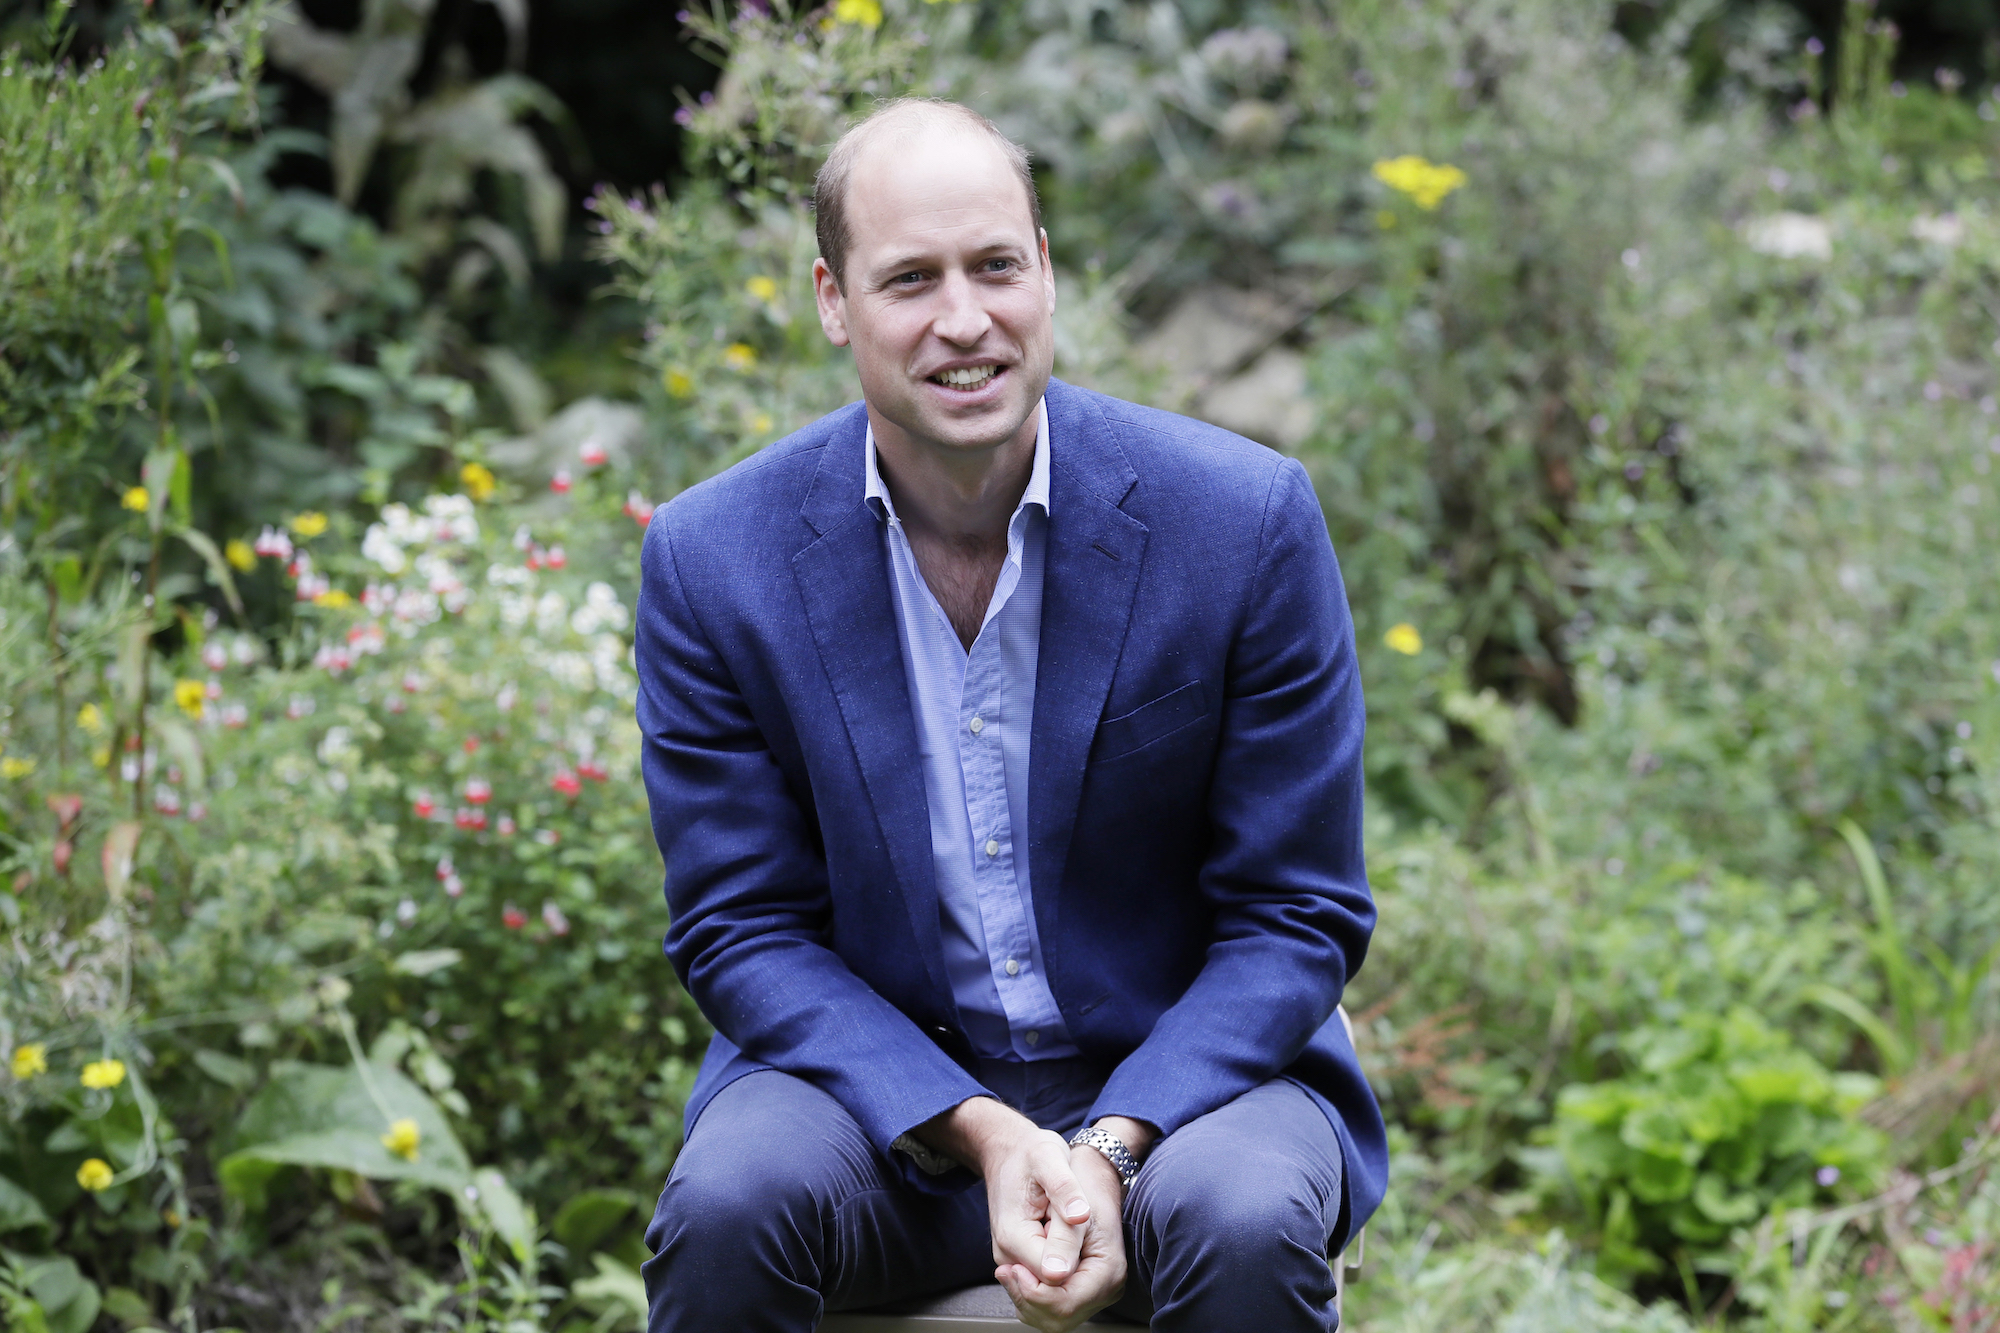 Prince William smiling, seated, in a garden